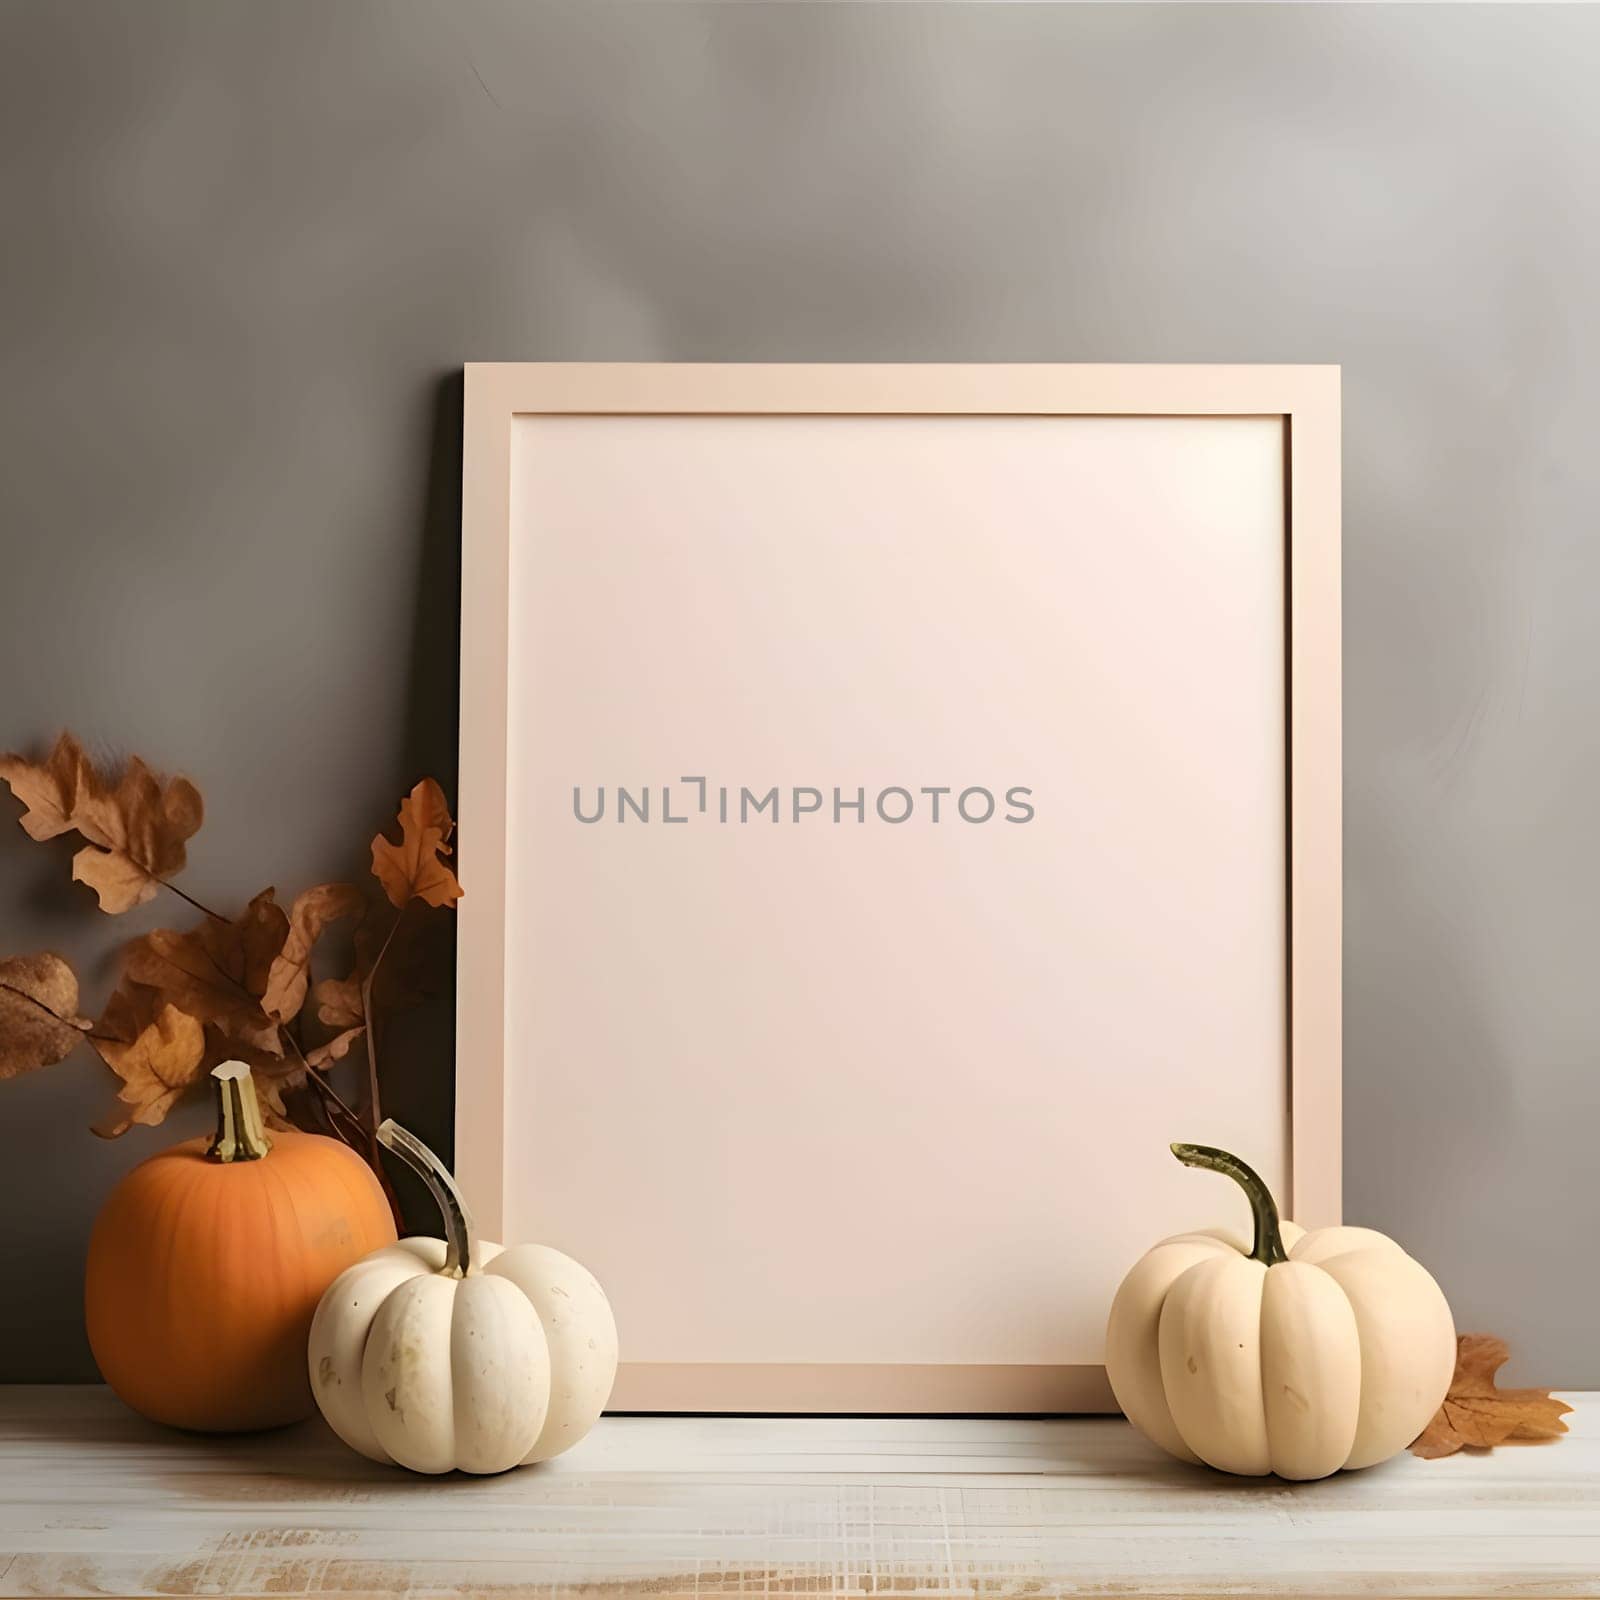 A white blank sheet of paper, pumpkins, leaves create a minimalist and stylish composition.